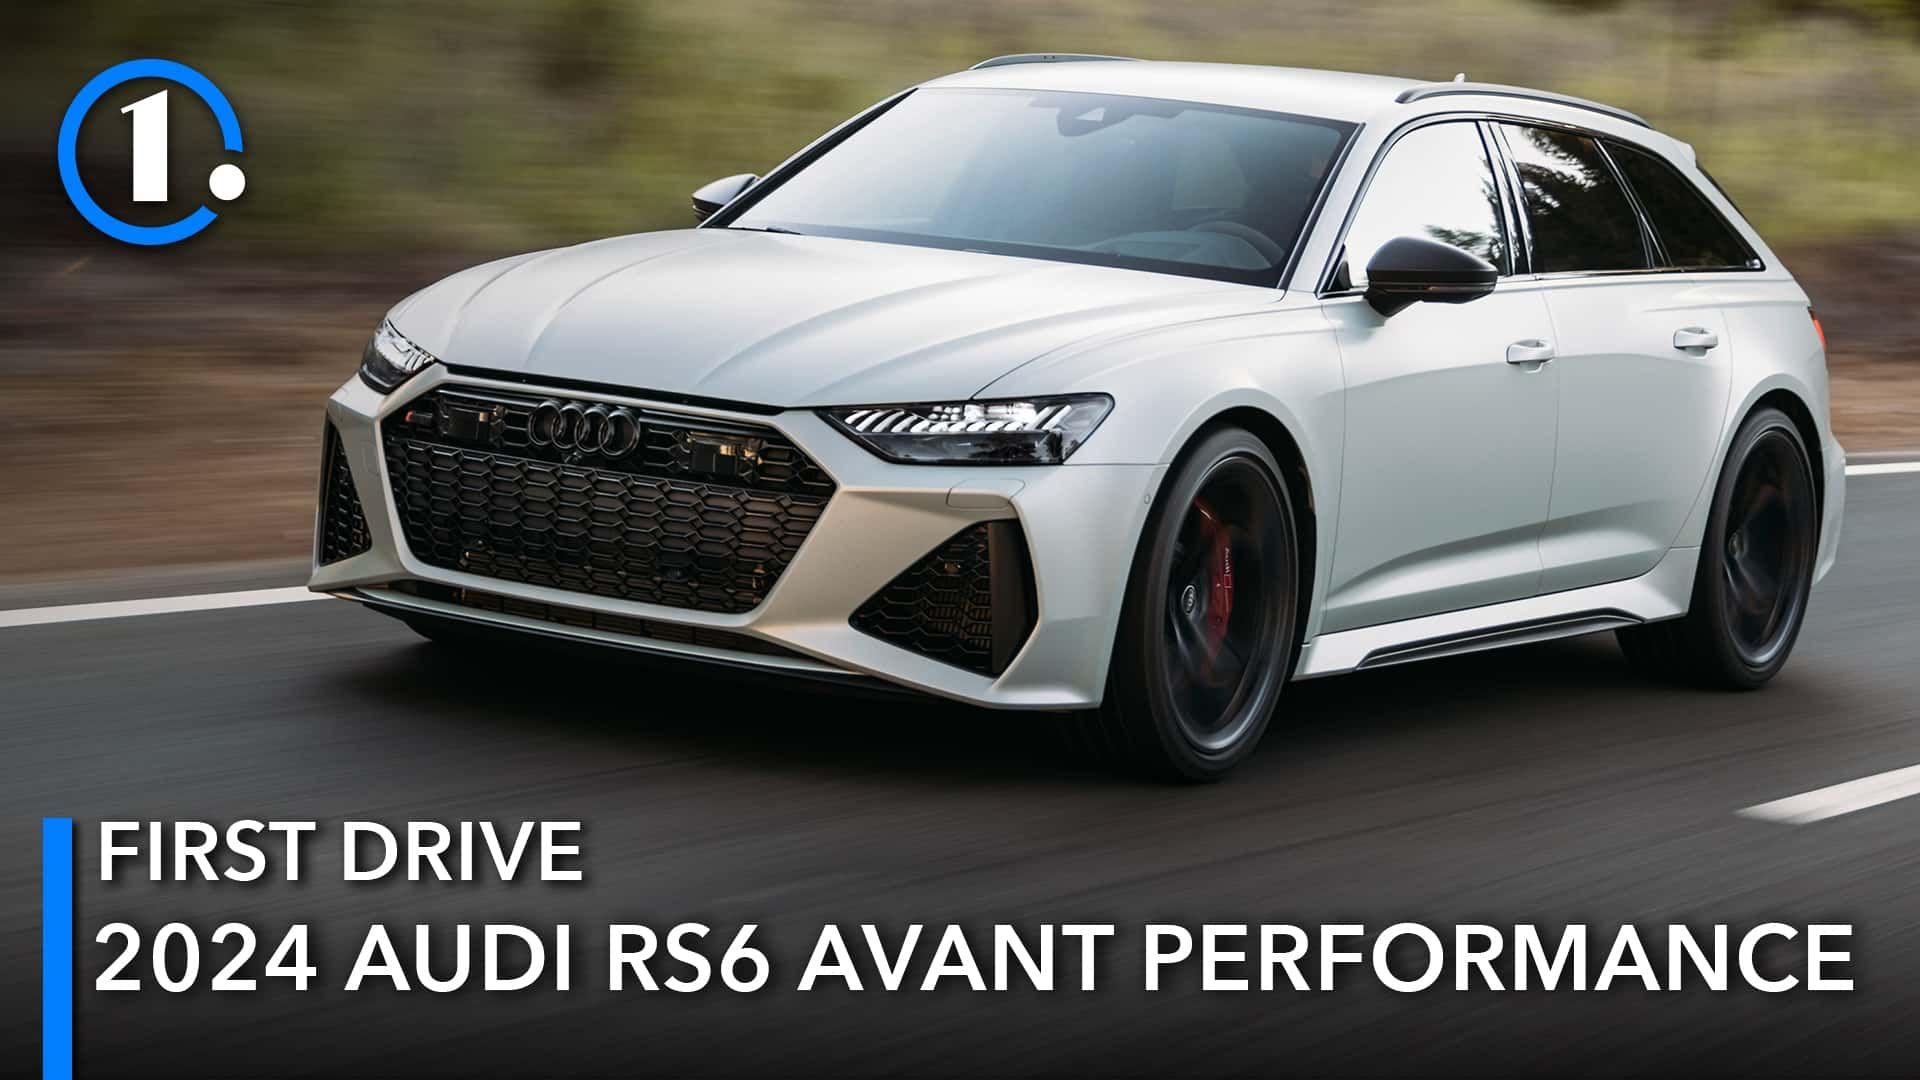 2024 Audi RS6 Avant Performance First Drive Review…